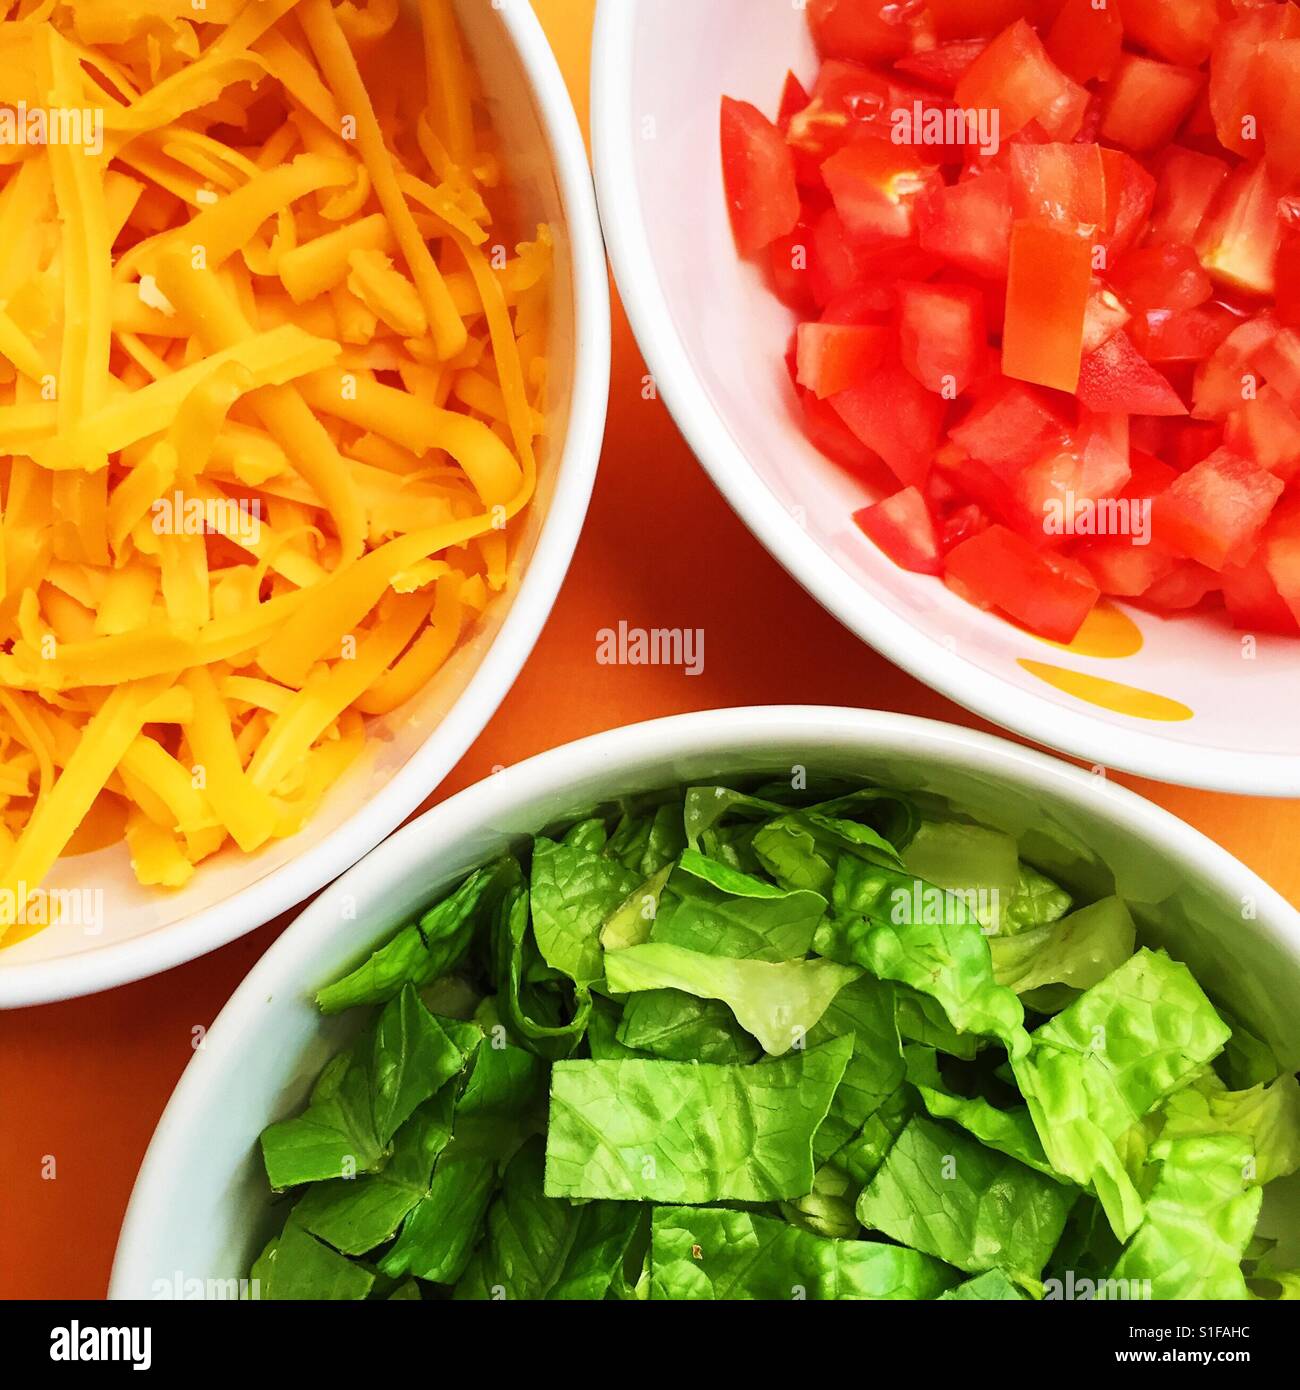 Three bowls containing grated cheese, diced tomatoes and lettuce Stock Photo